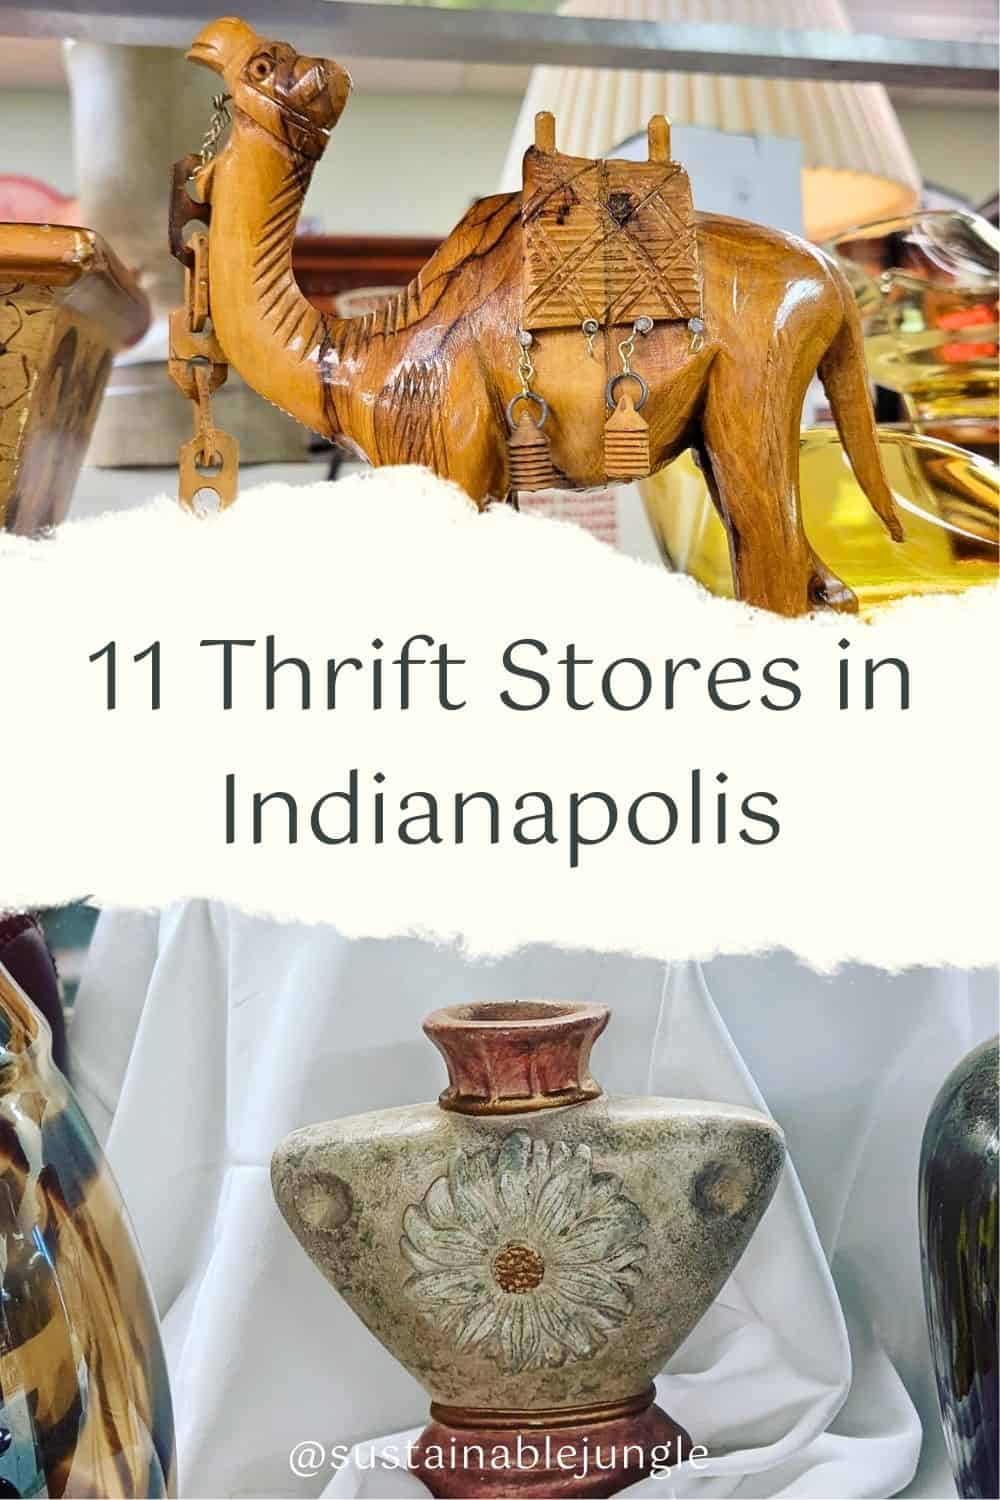 11 Indianapolis Thrift Stores You Don’t Want to Nap On Images by NobleCause Resale and Mission 27 Resale #thriftstoresindianapolis #indianapolisthriftstores #bestthriftstoresinindianapolis #consignmentstoresindianapolis #consignmentshopsindianapolis #sustainablejungle